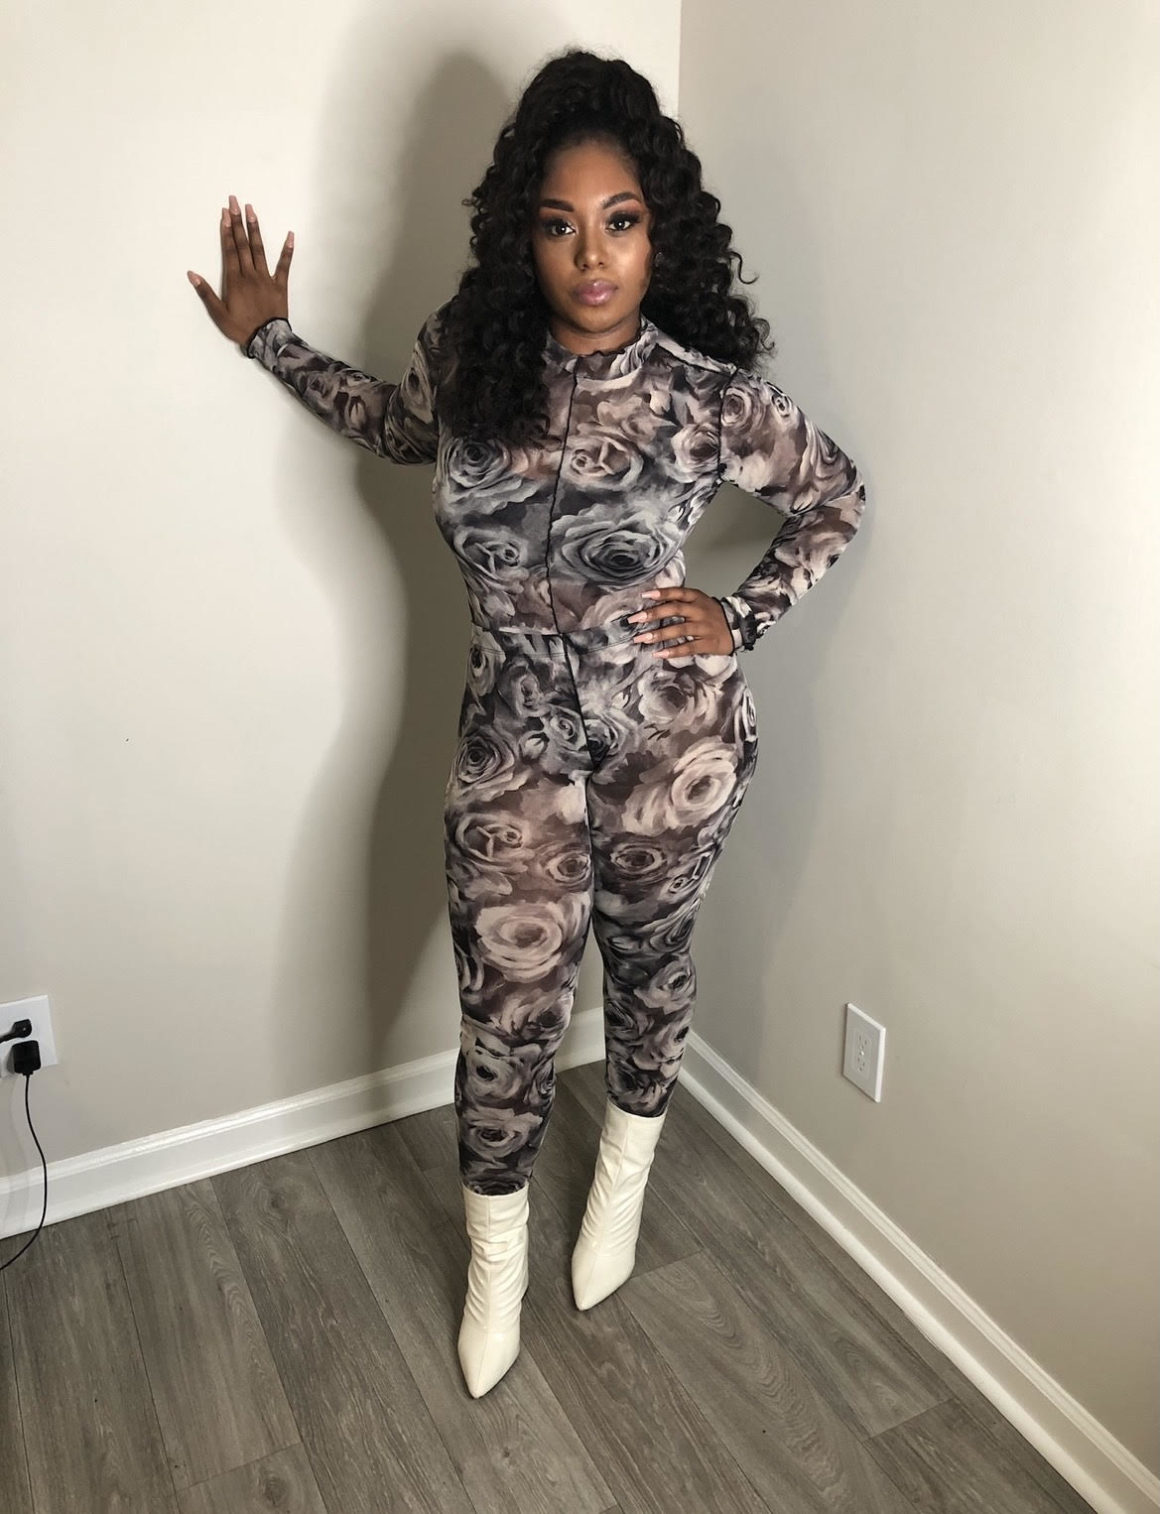 Fashion Bombshell of the Day: Destiny from Virginia – Fashion Bomb Daily